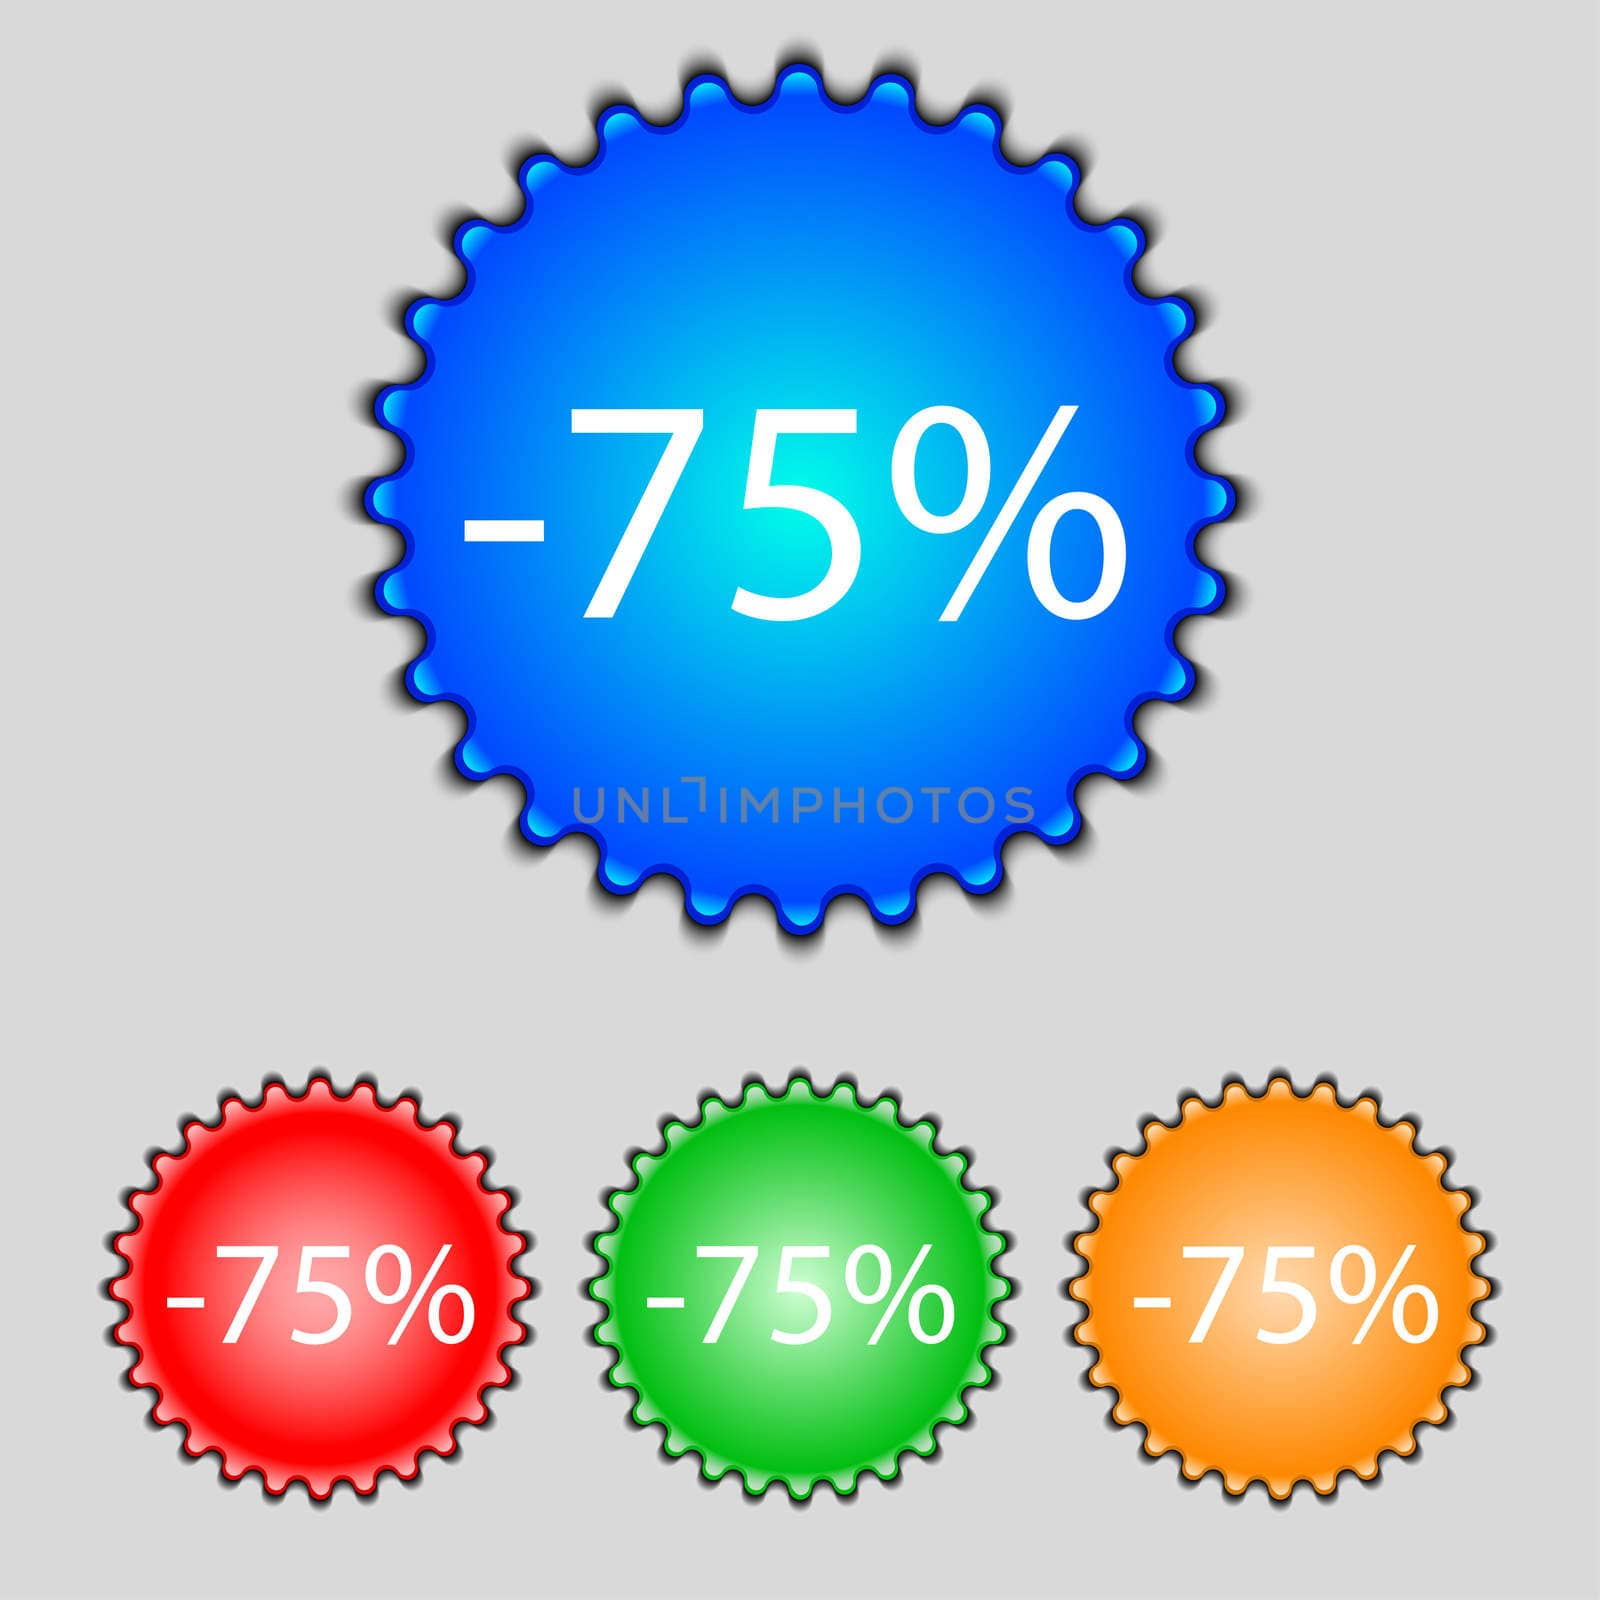 75 percent discount sign icon. Sale symbol. Special offer label. Set of colored buttons illustration